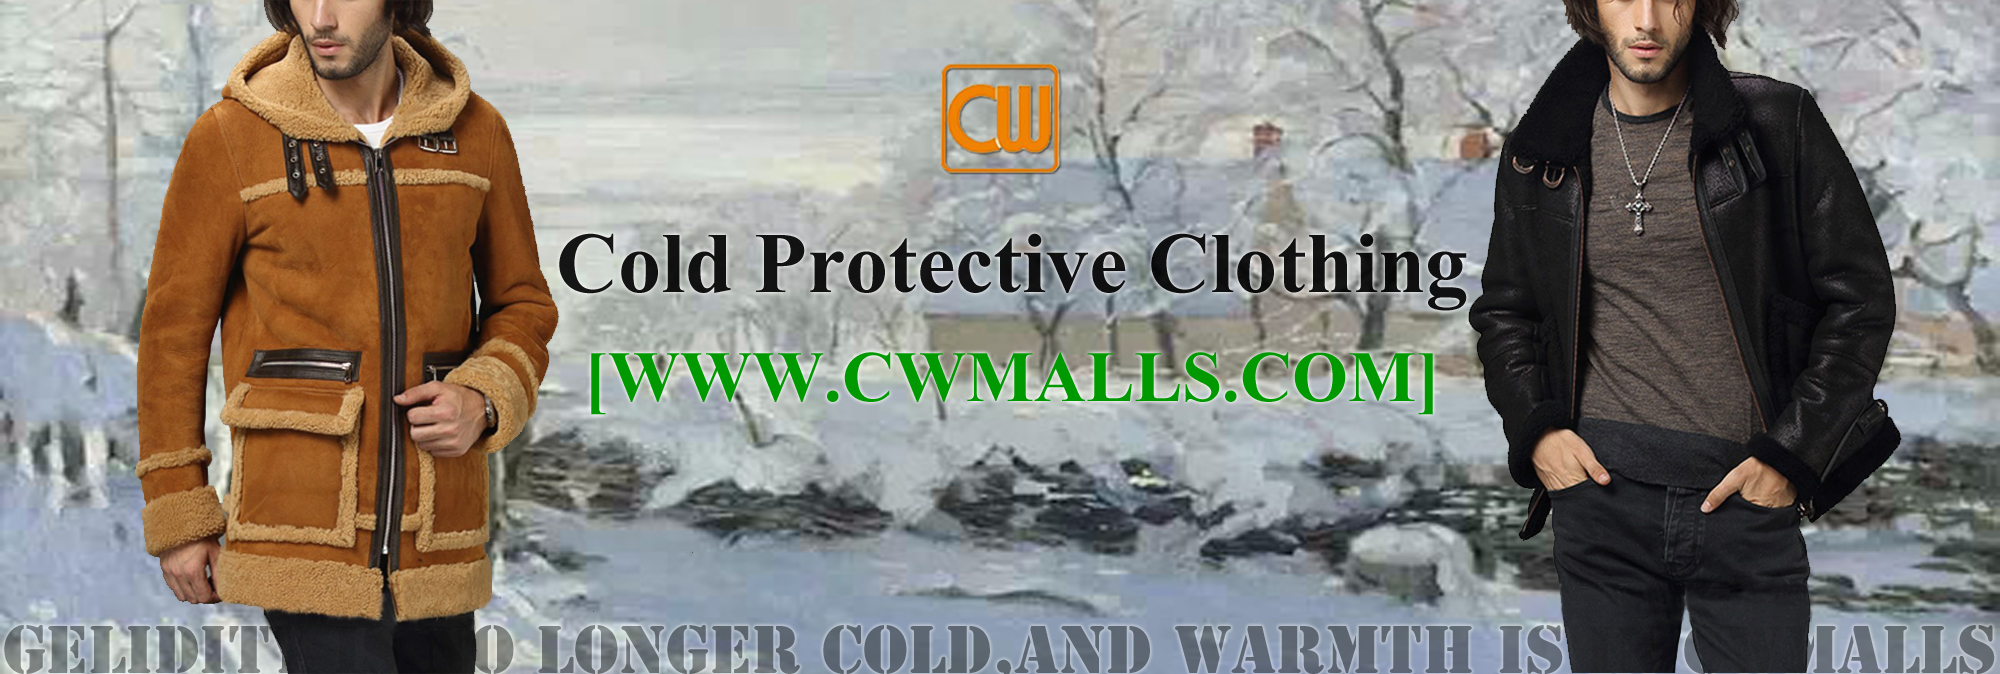 CWMALLS Cold Protective Clothing